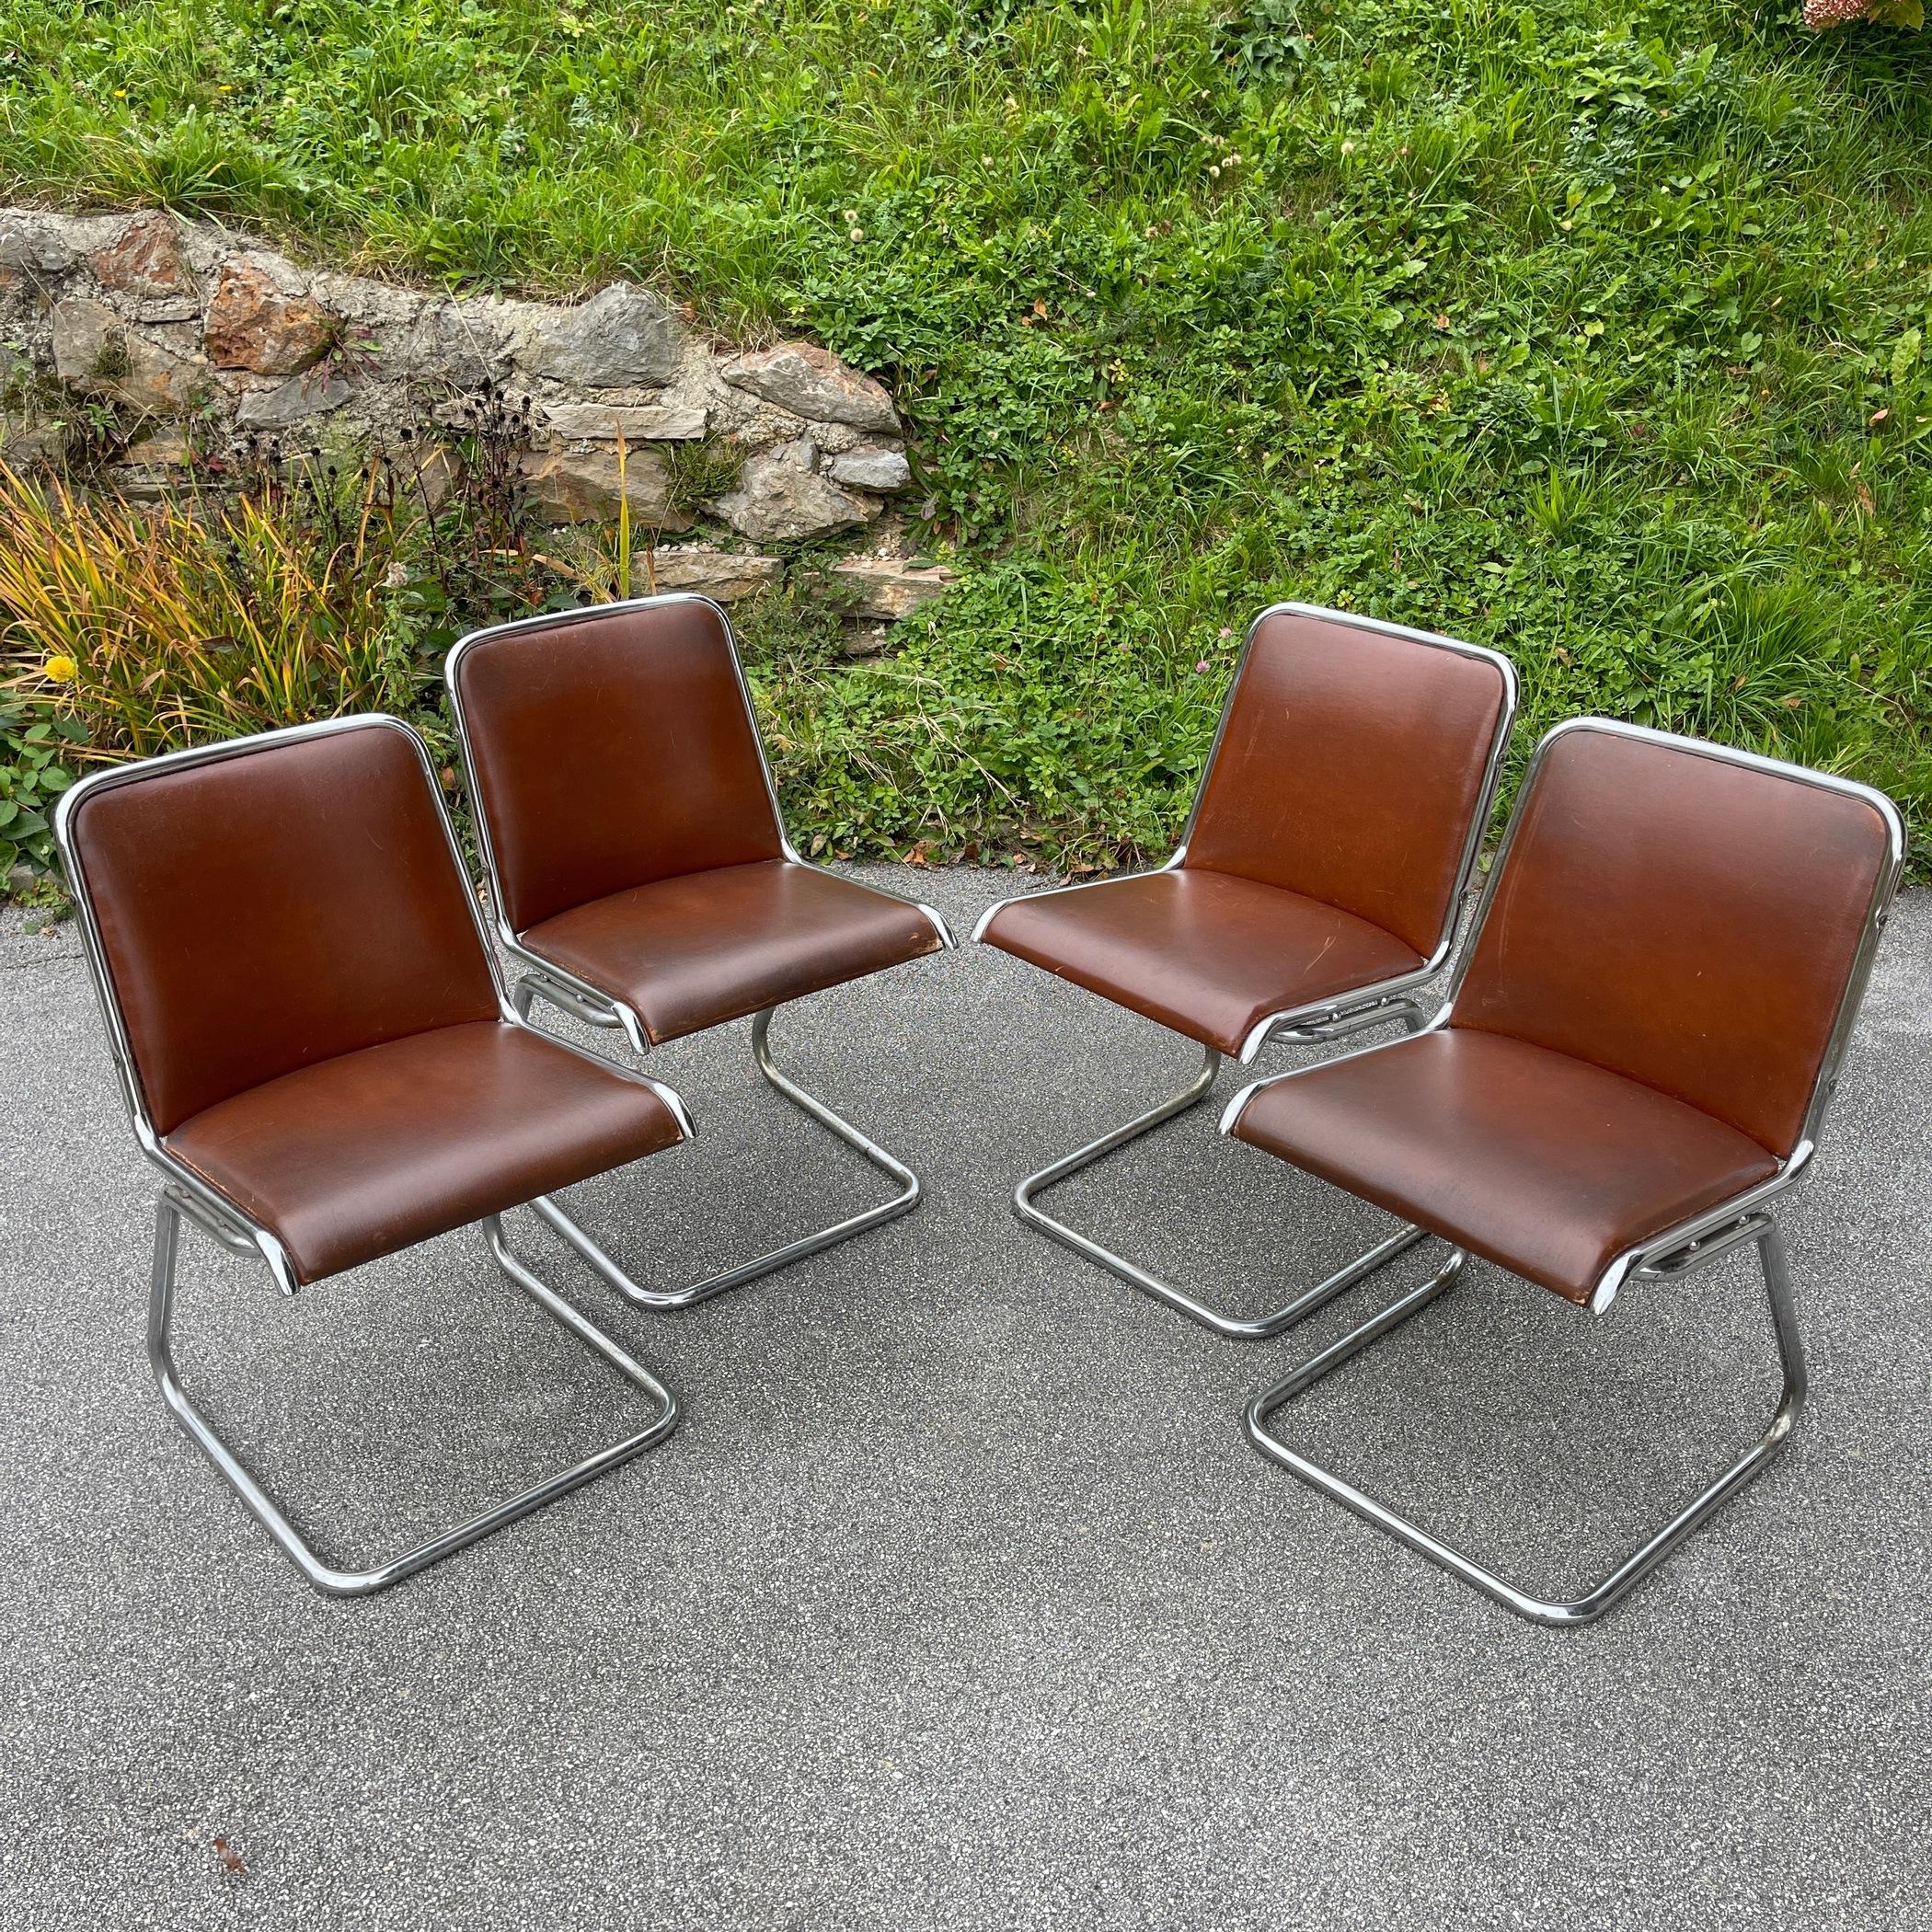 The extremely comfortable and amazing set of 4 mid-century chairs were made in Italy in the 1970s. Italian industrial production. Good vintage condition. The photographs show signs of wear and tear. There are traces of natural patina on the metal.